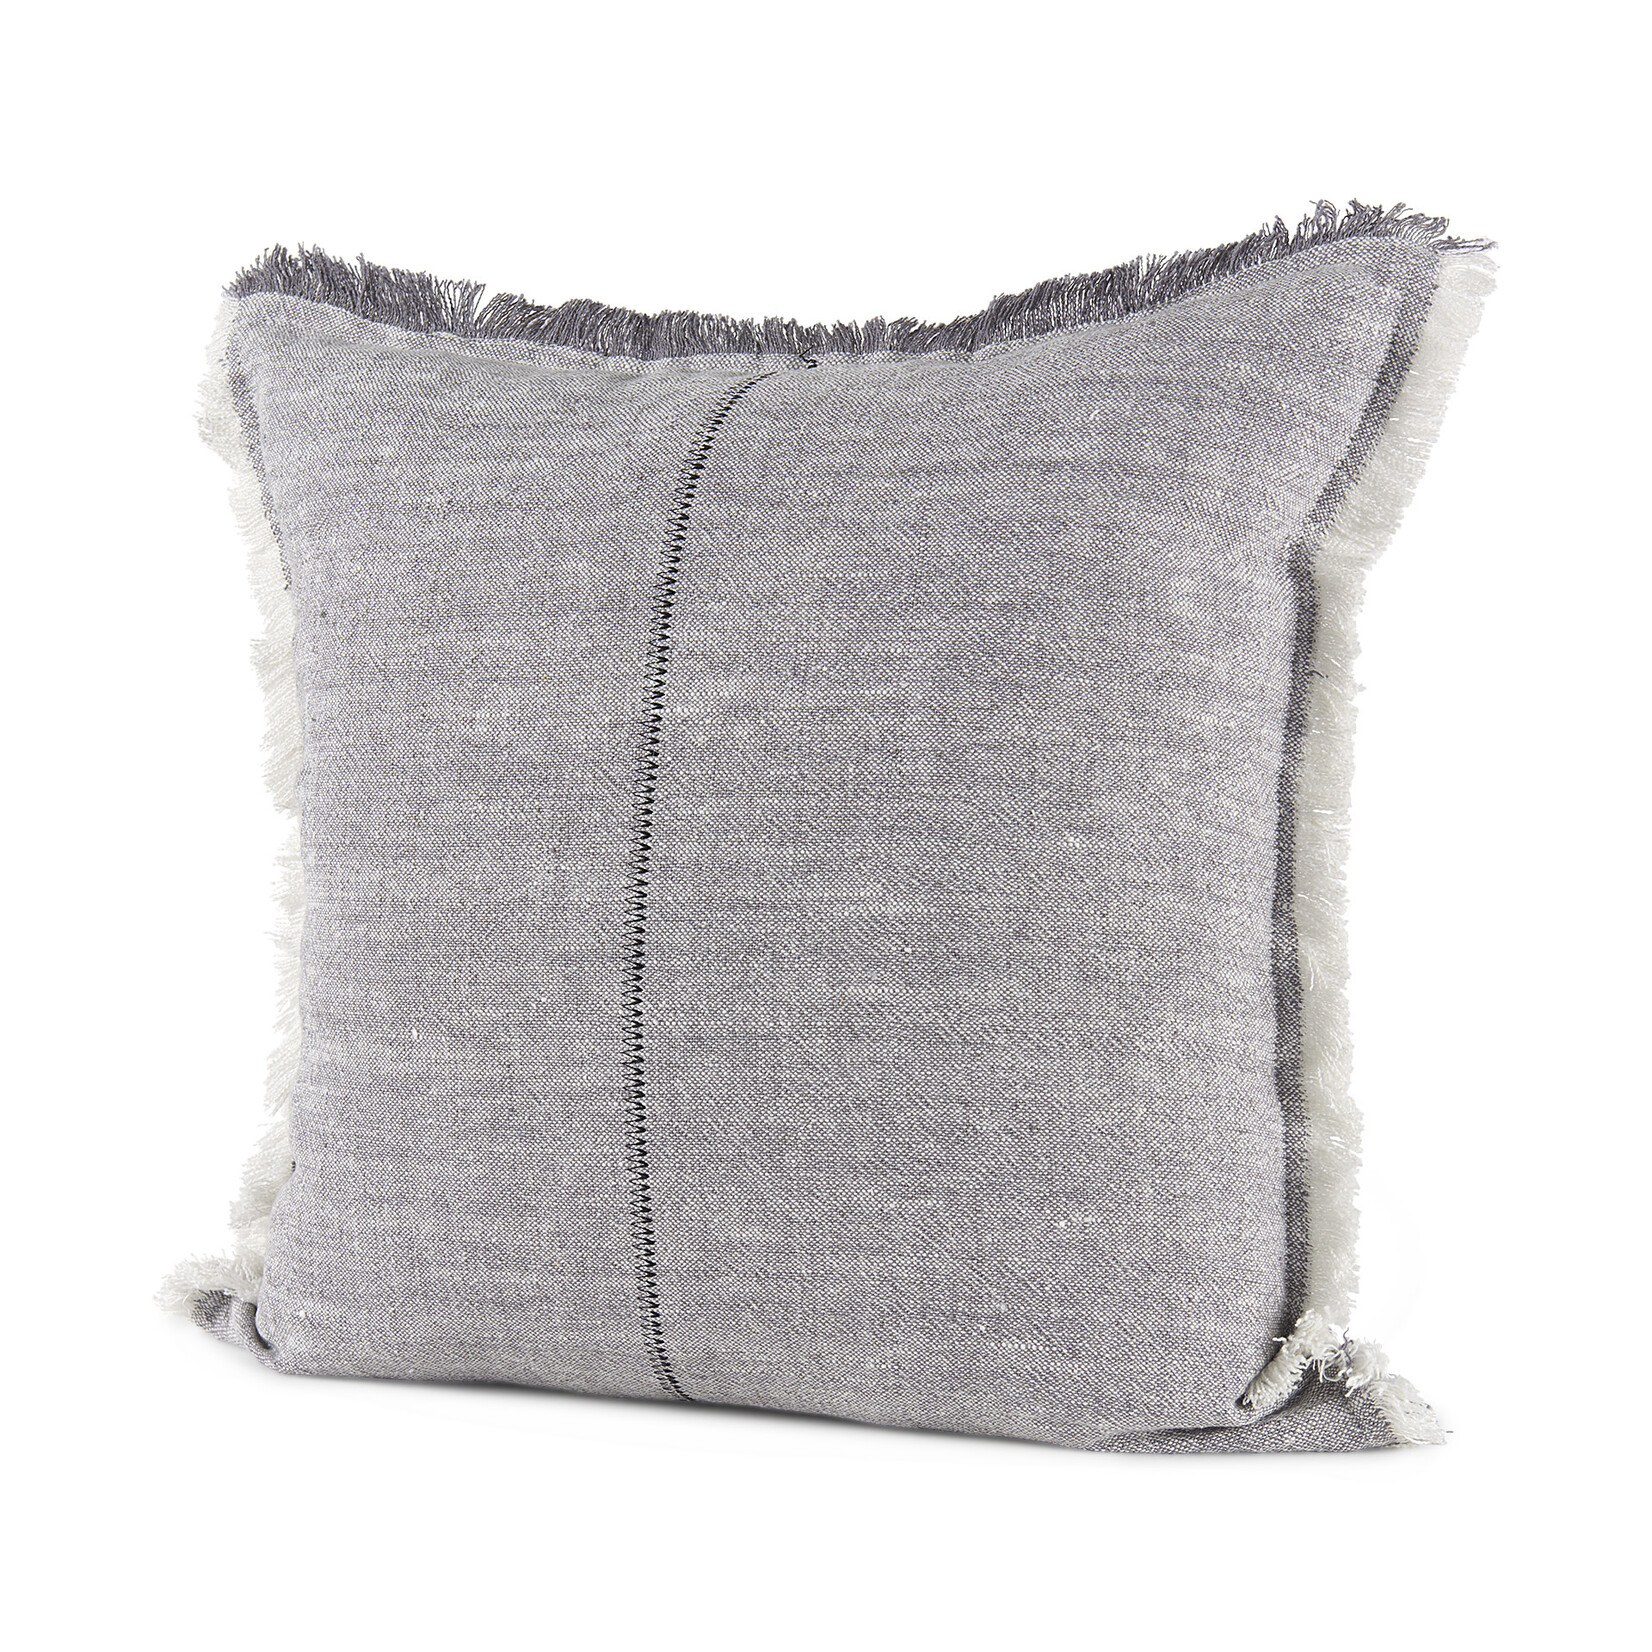 Thais 20 x 20 Blue and Cream Fringed Pillow Cover